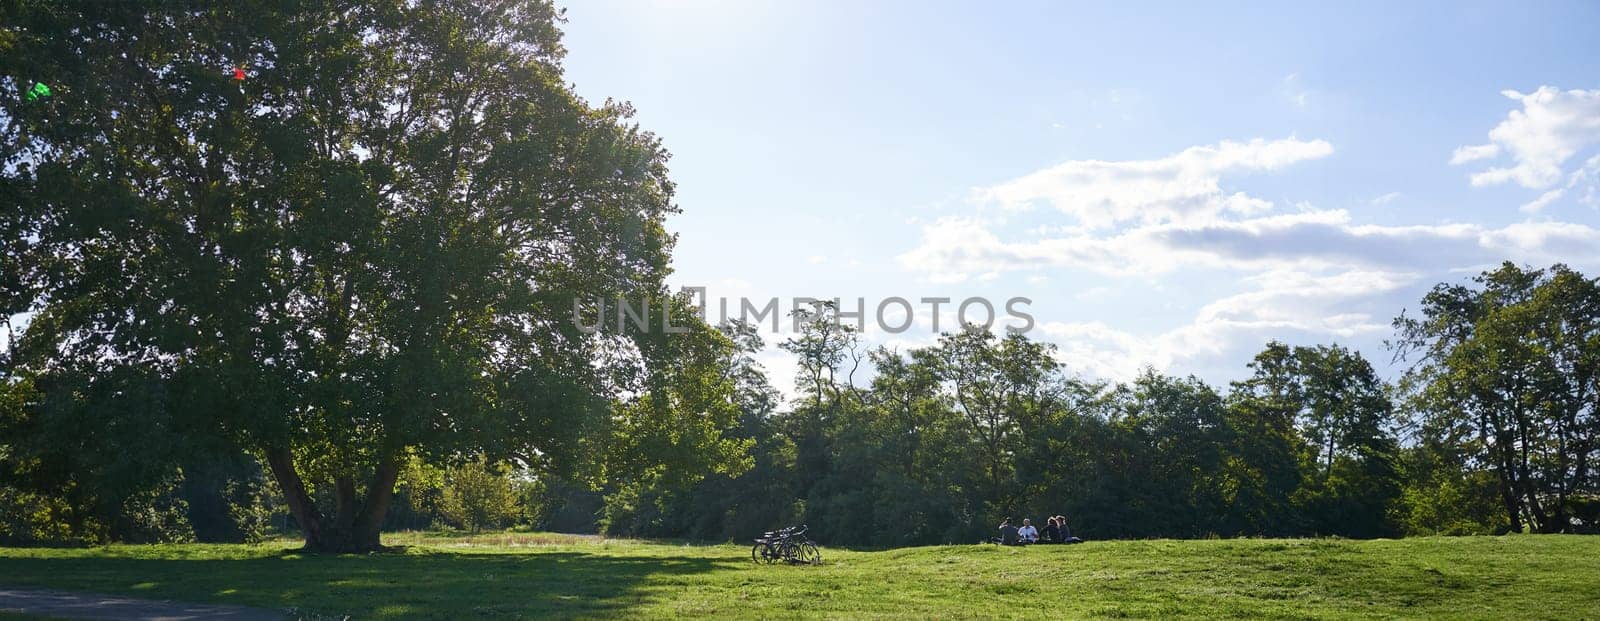 Sunny day in park. Landscape of green grass and two bicycles standing near tree, sunbeams lighting up the scene.